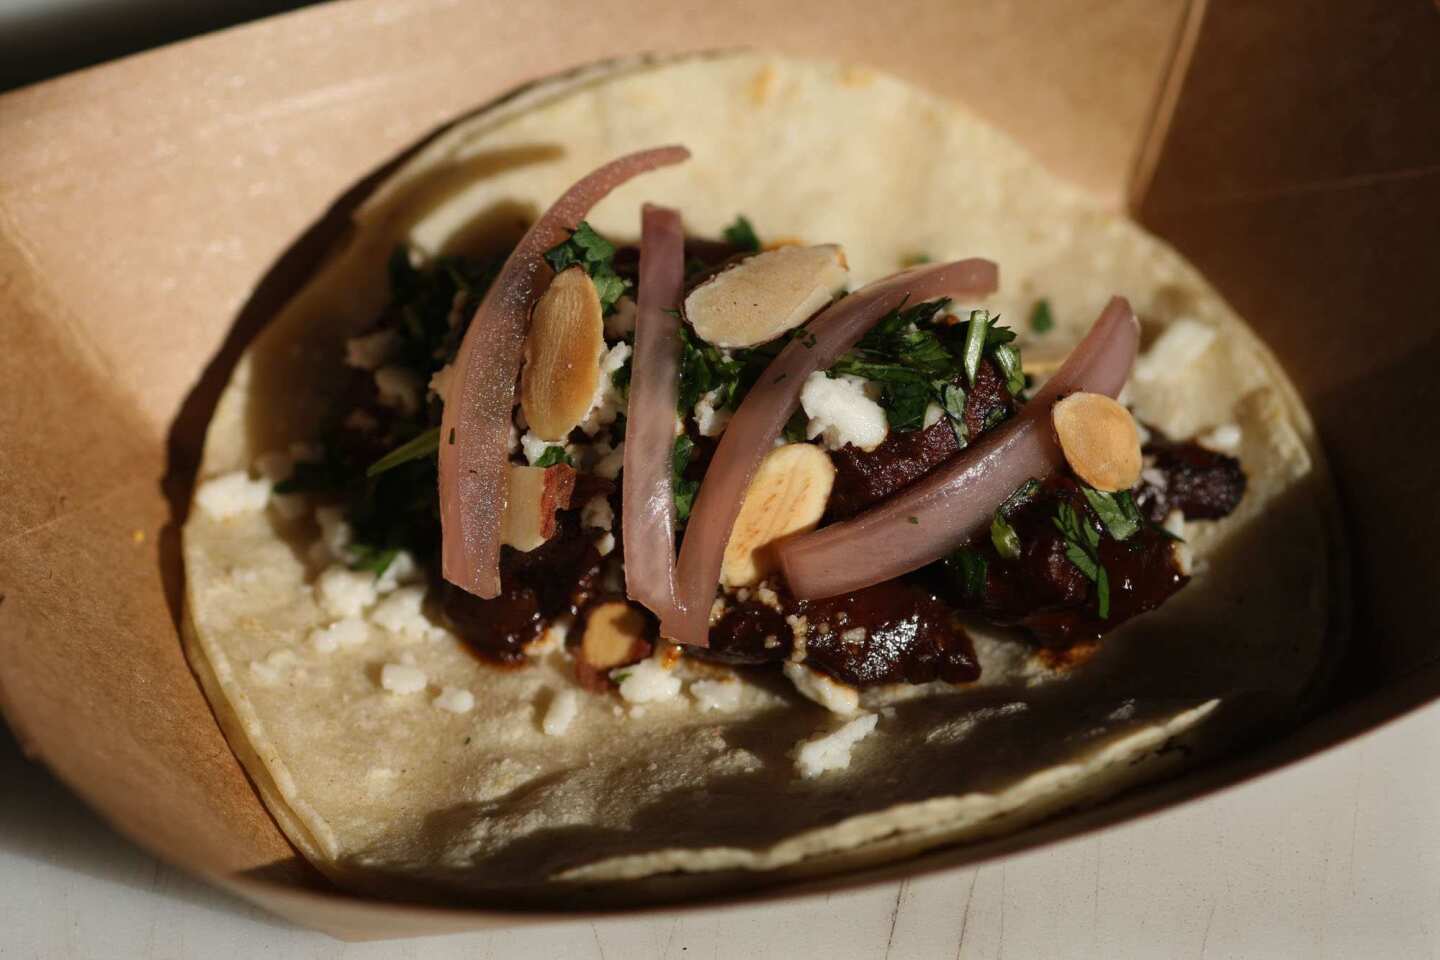 The chicken mole taco is endowed with complex flavors.